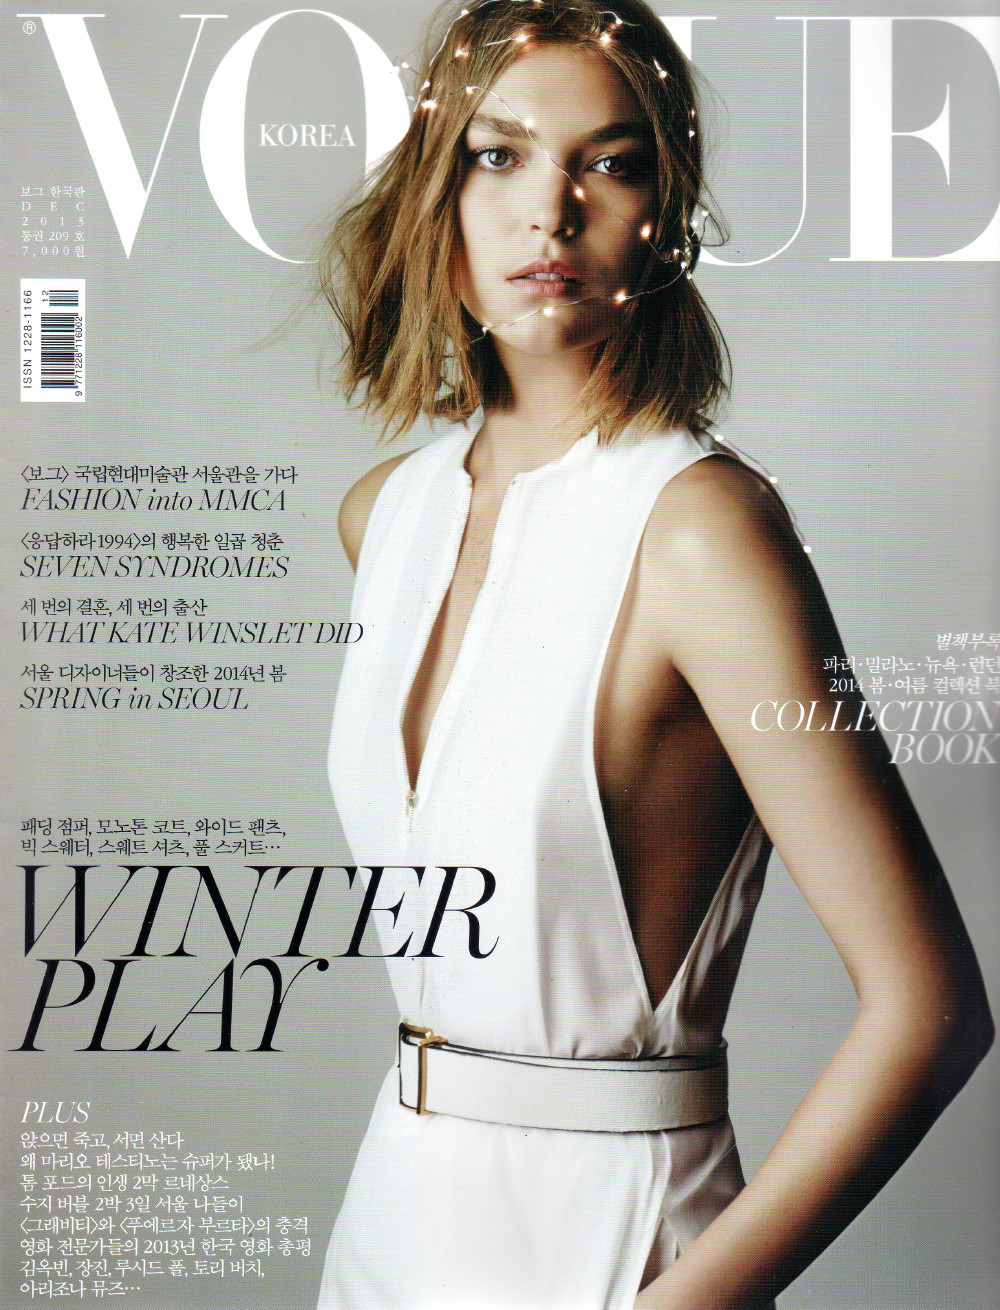 Vogue December 2013 – Seouly Shopping